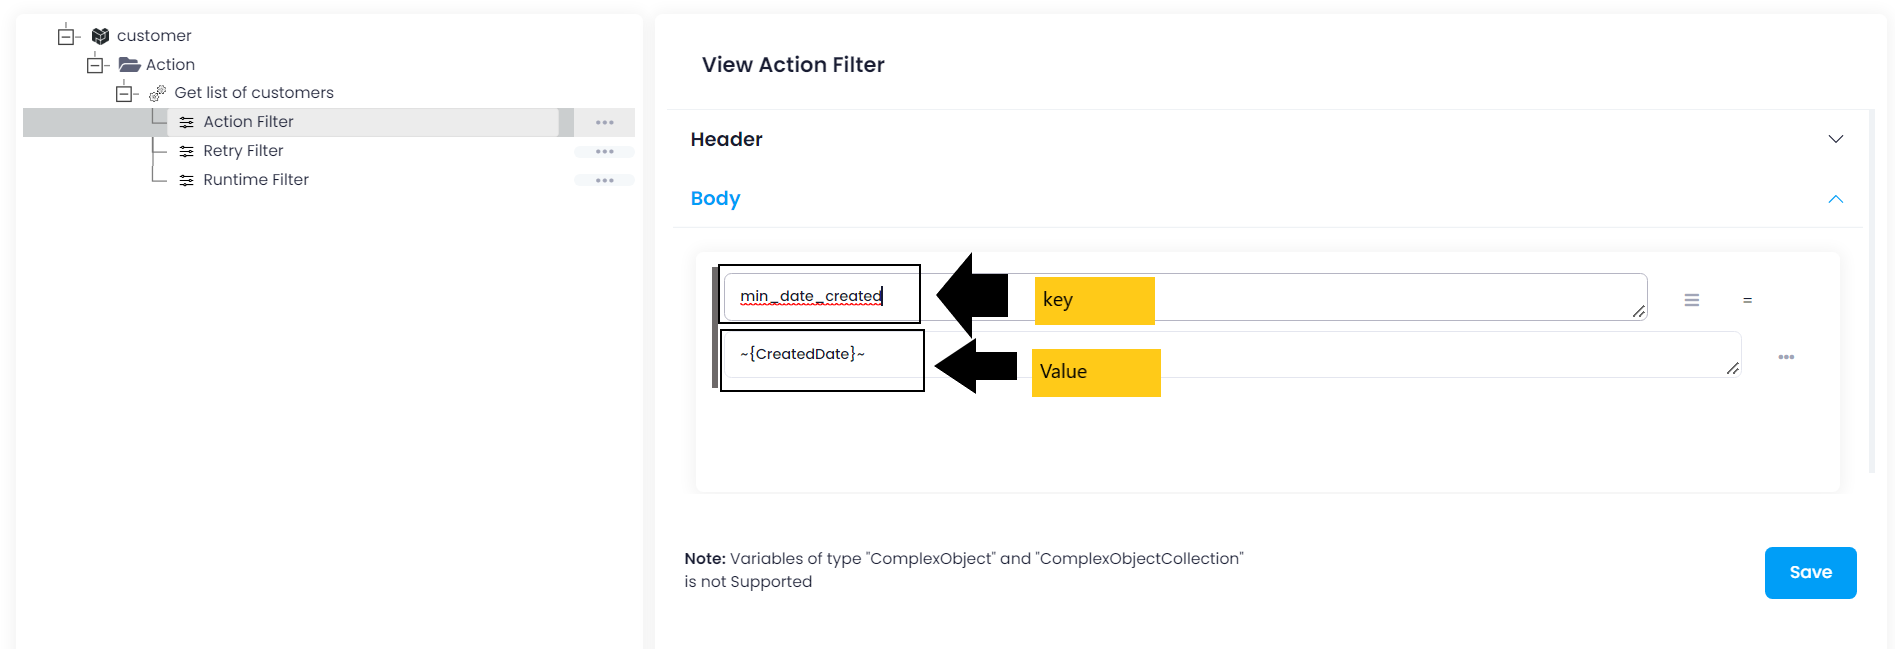 bigcommerce_actionfilter